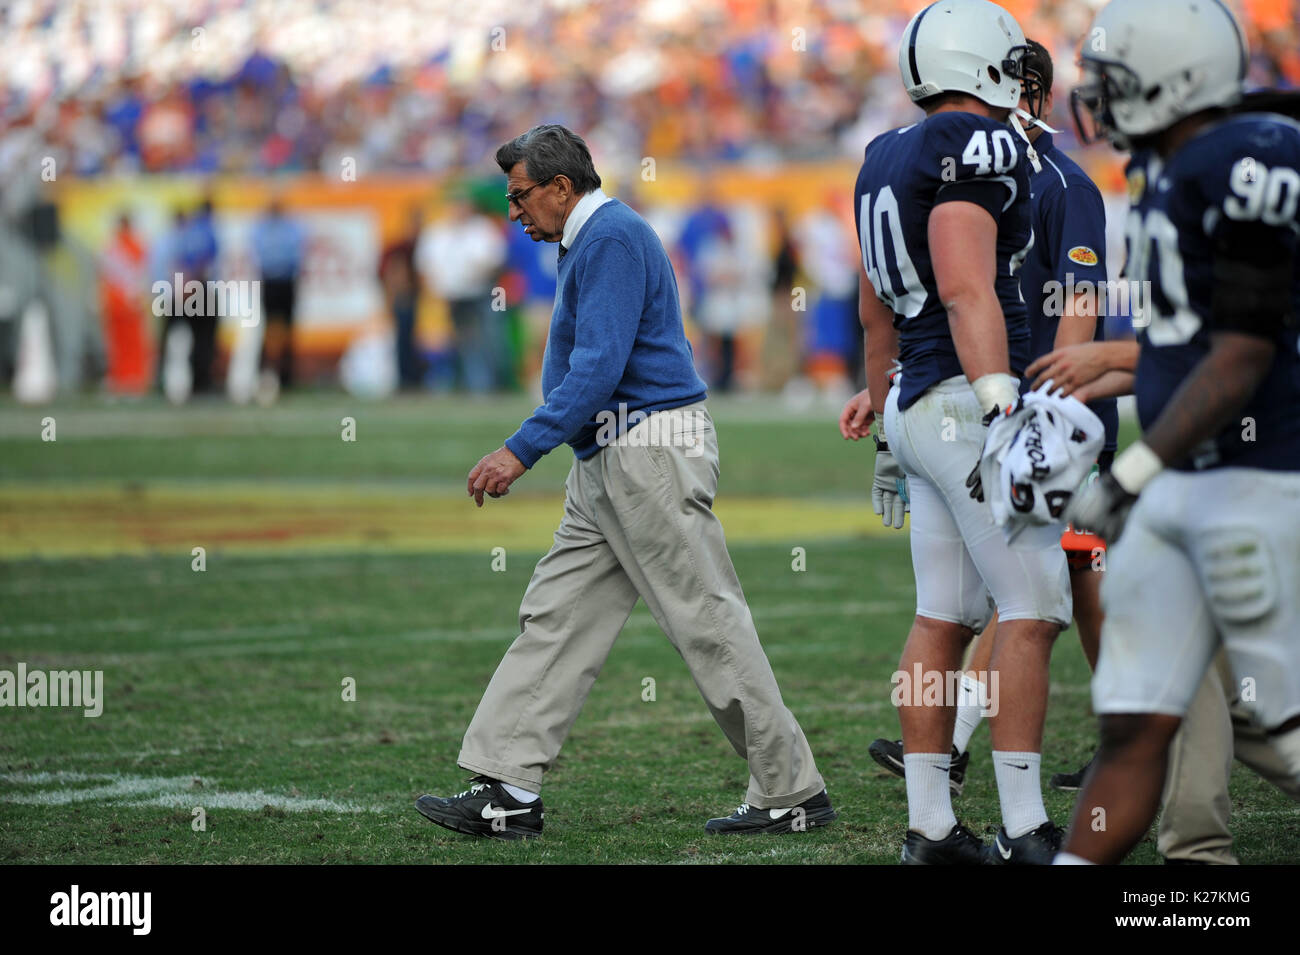 Joe Paterno of Penn State University football walks the sidelines during the Outback Bowl January 1, 20111 in Tampa, Florida against UF. Stock Photo